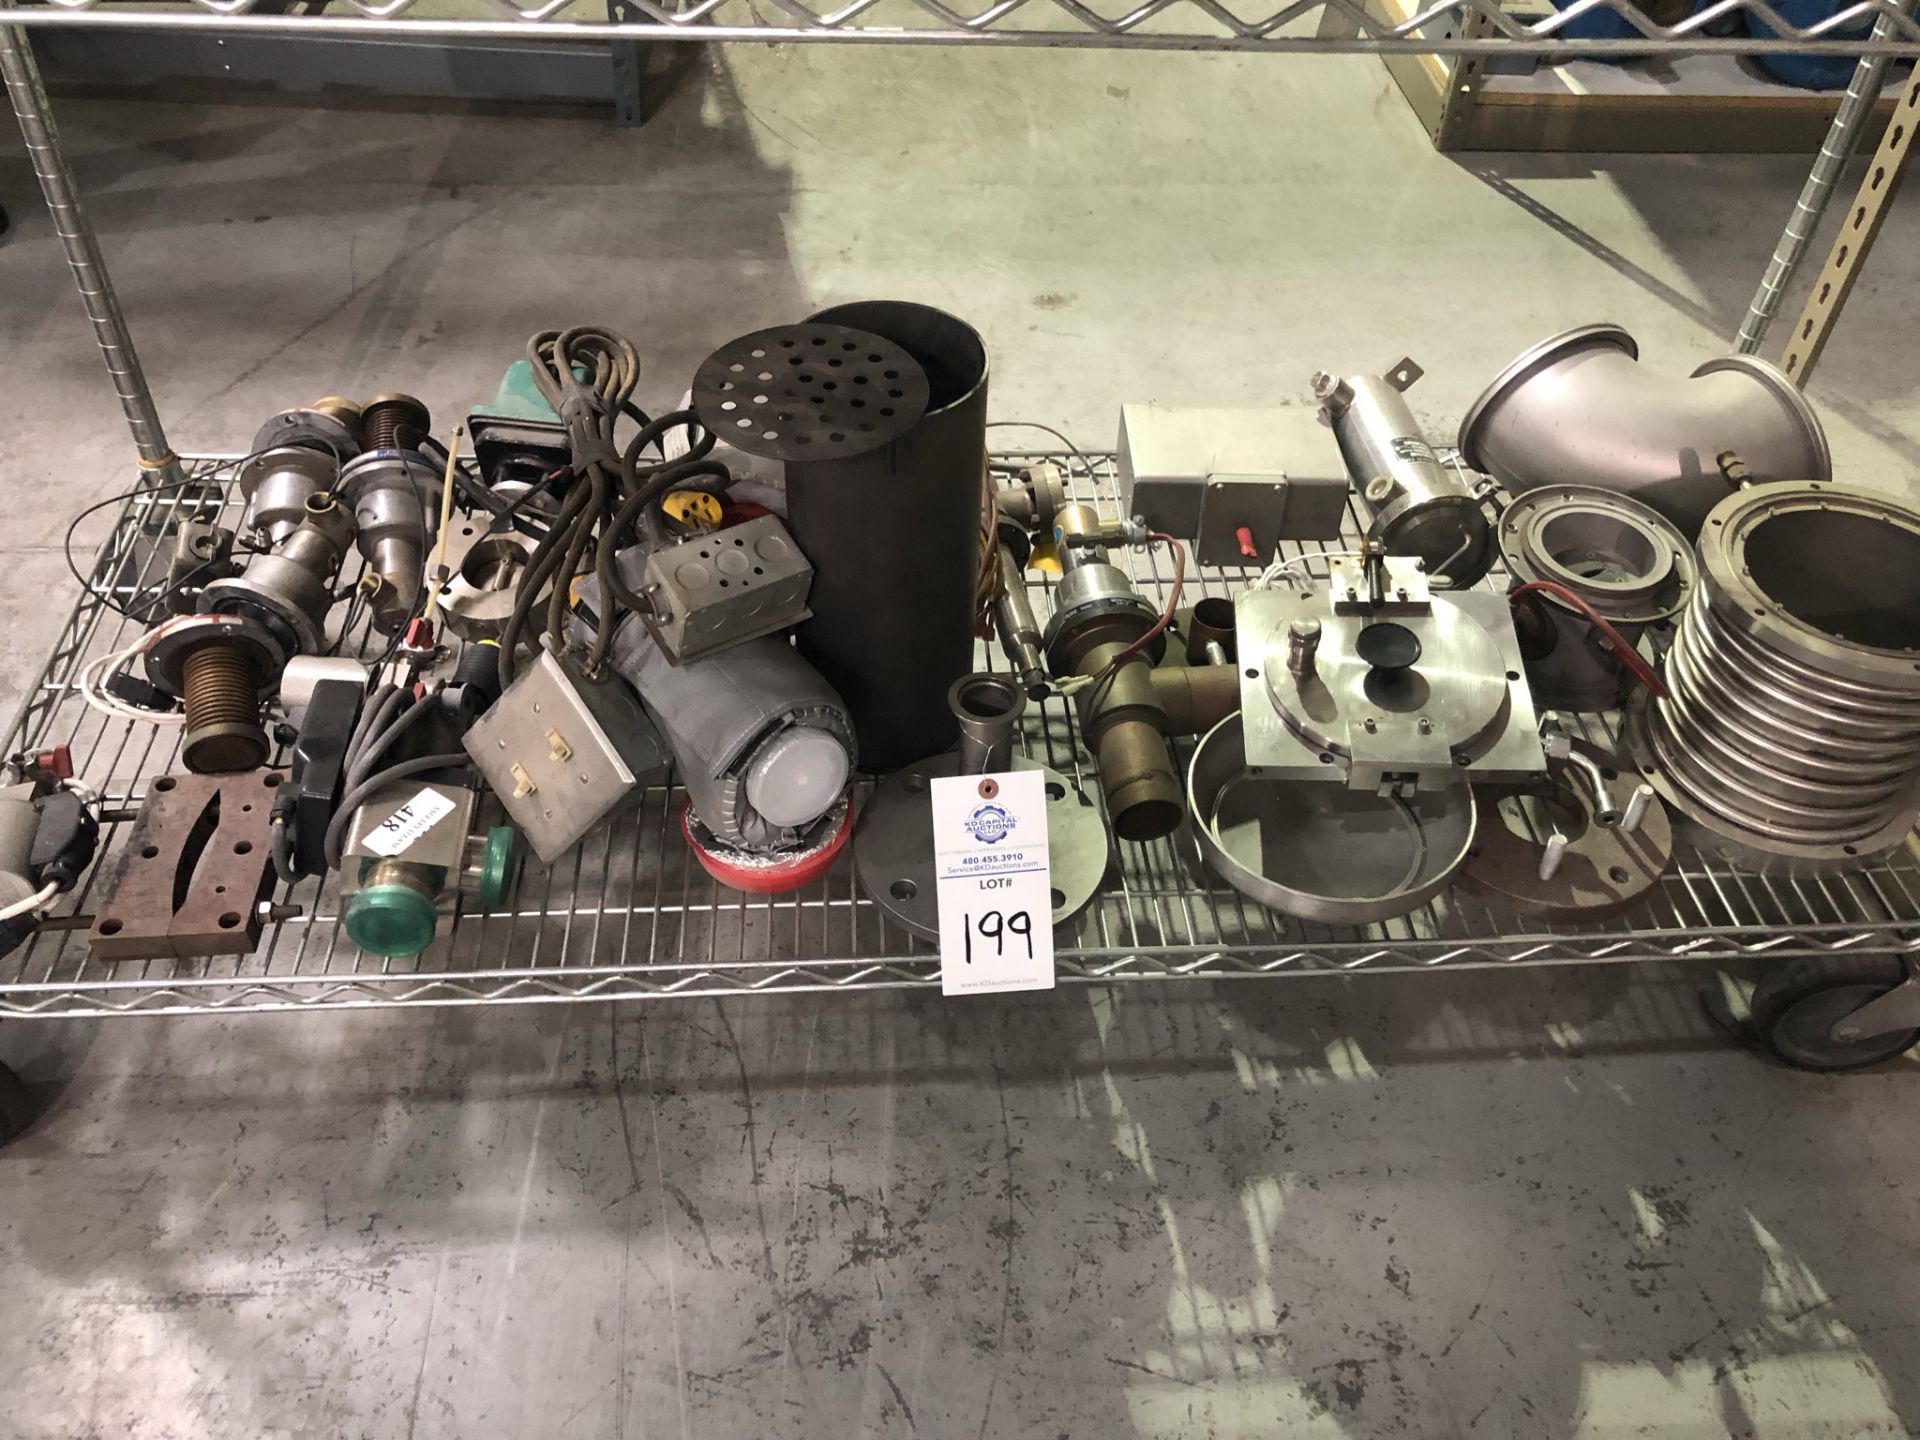 MISC lot of vauum fittings, Varian ion pump, 6" flanged elbow, MKS bake out heaters, more included